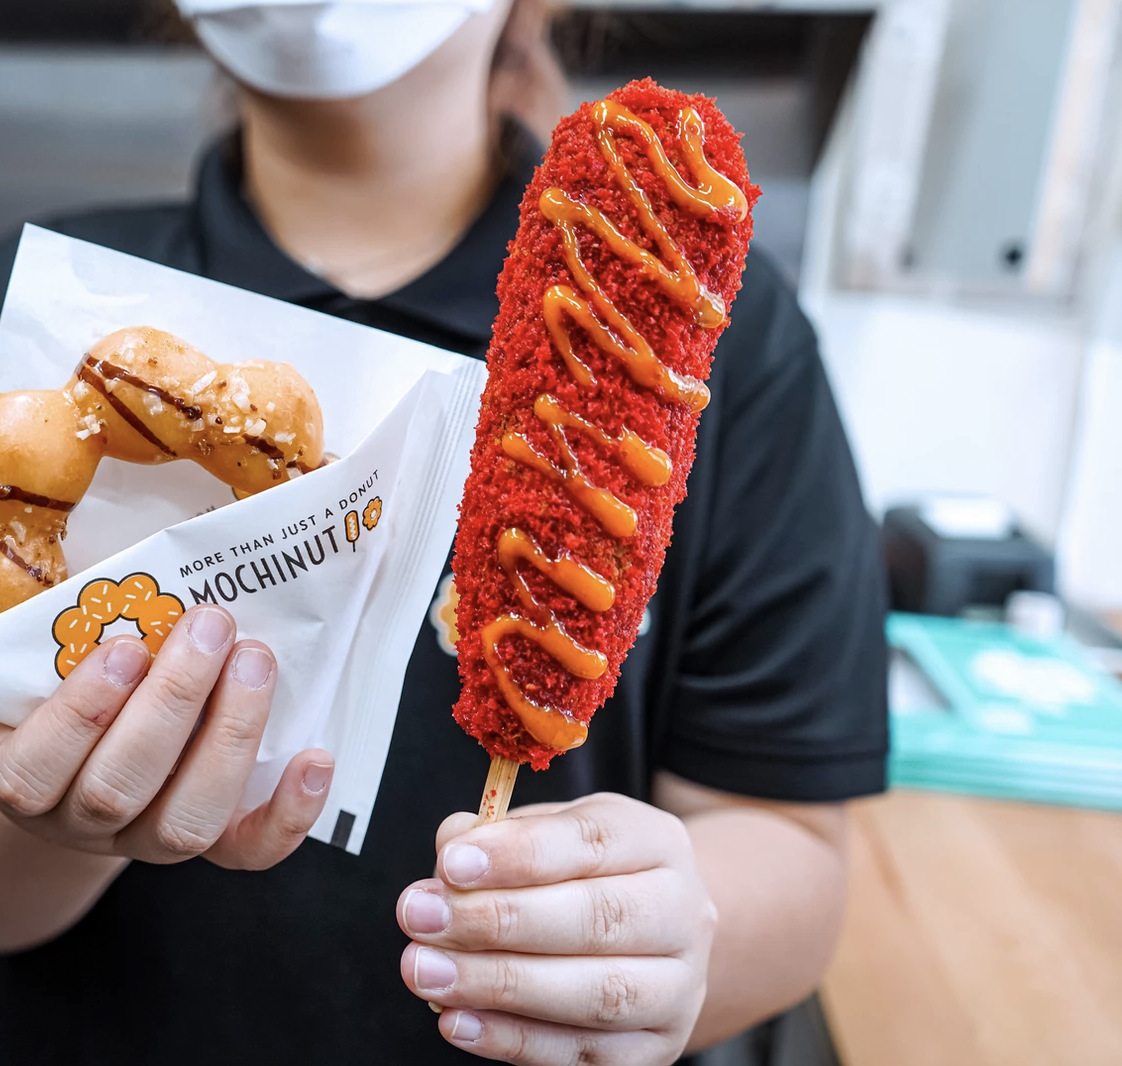 A person holds a mochi doughnut and a corn dog on a stick covered in bright red powder